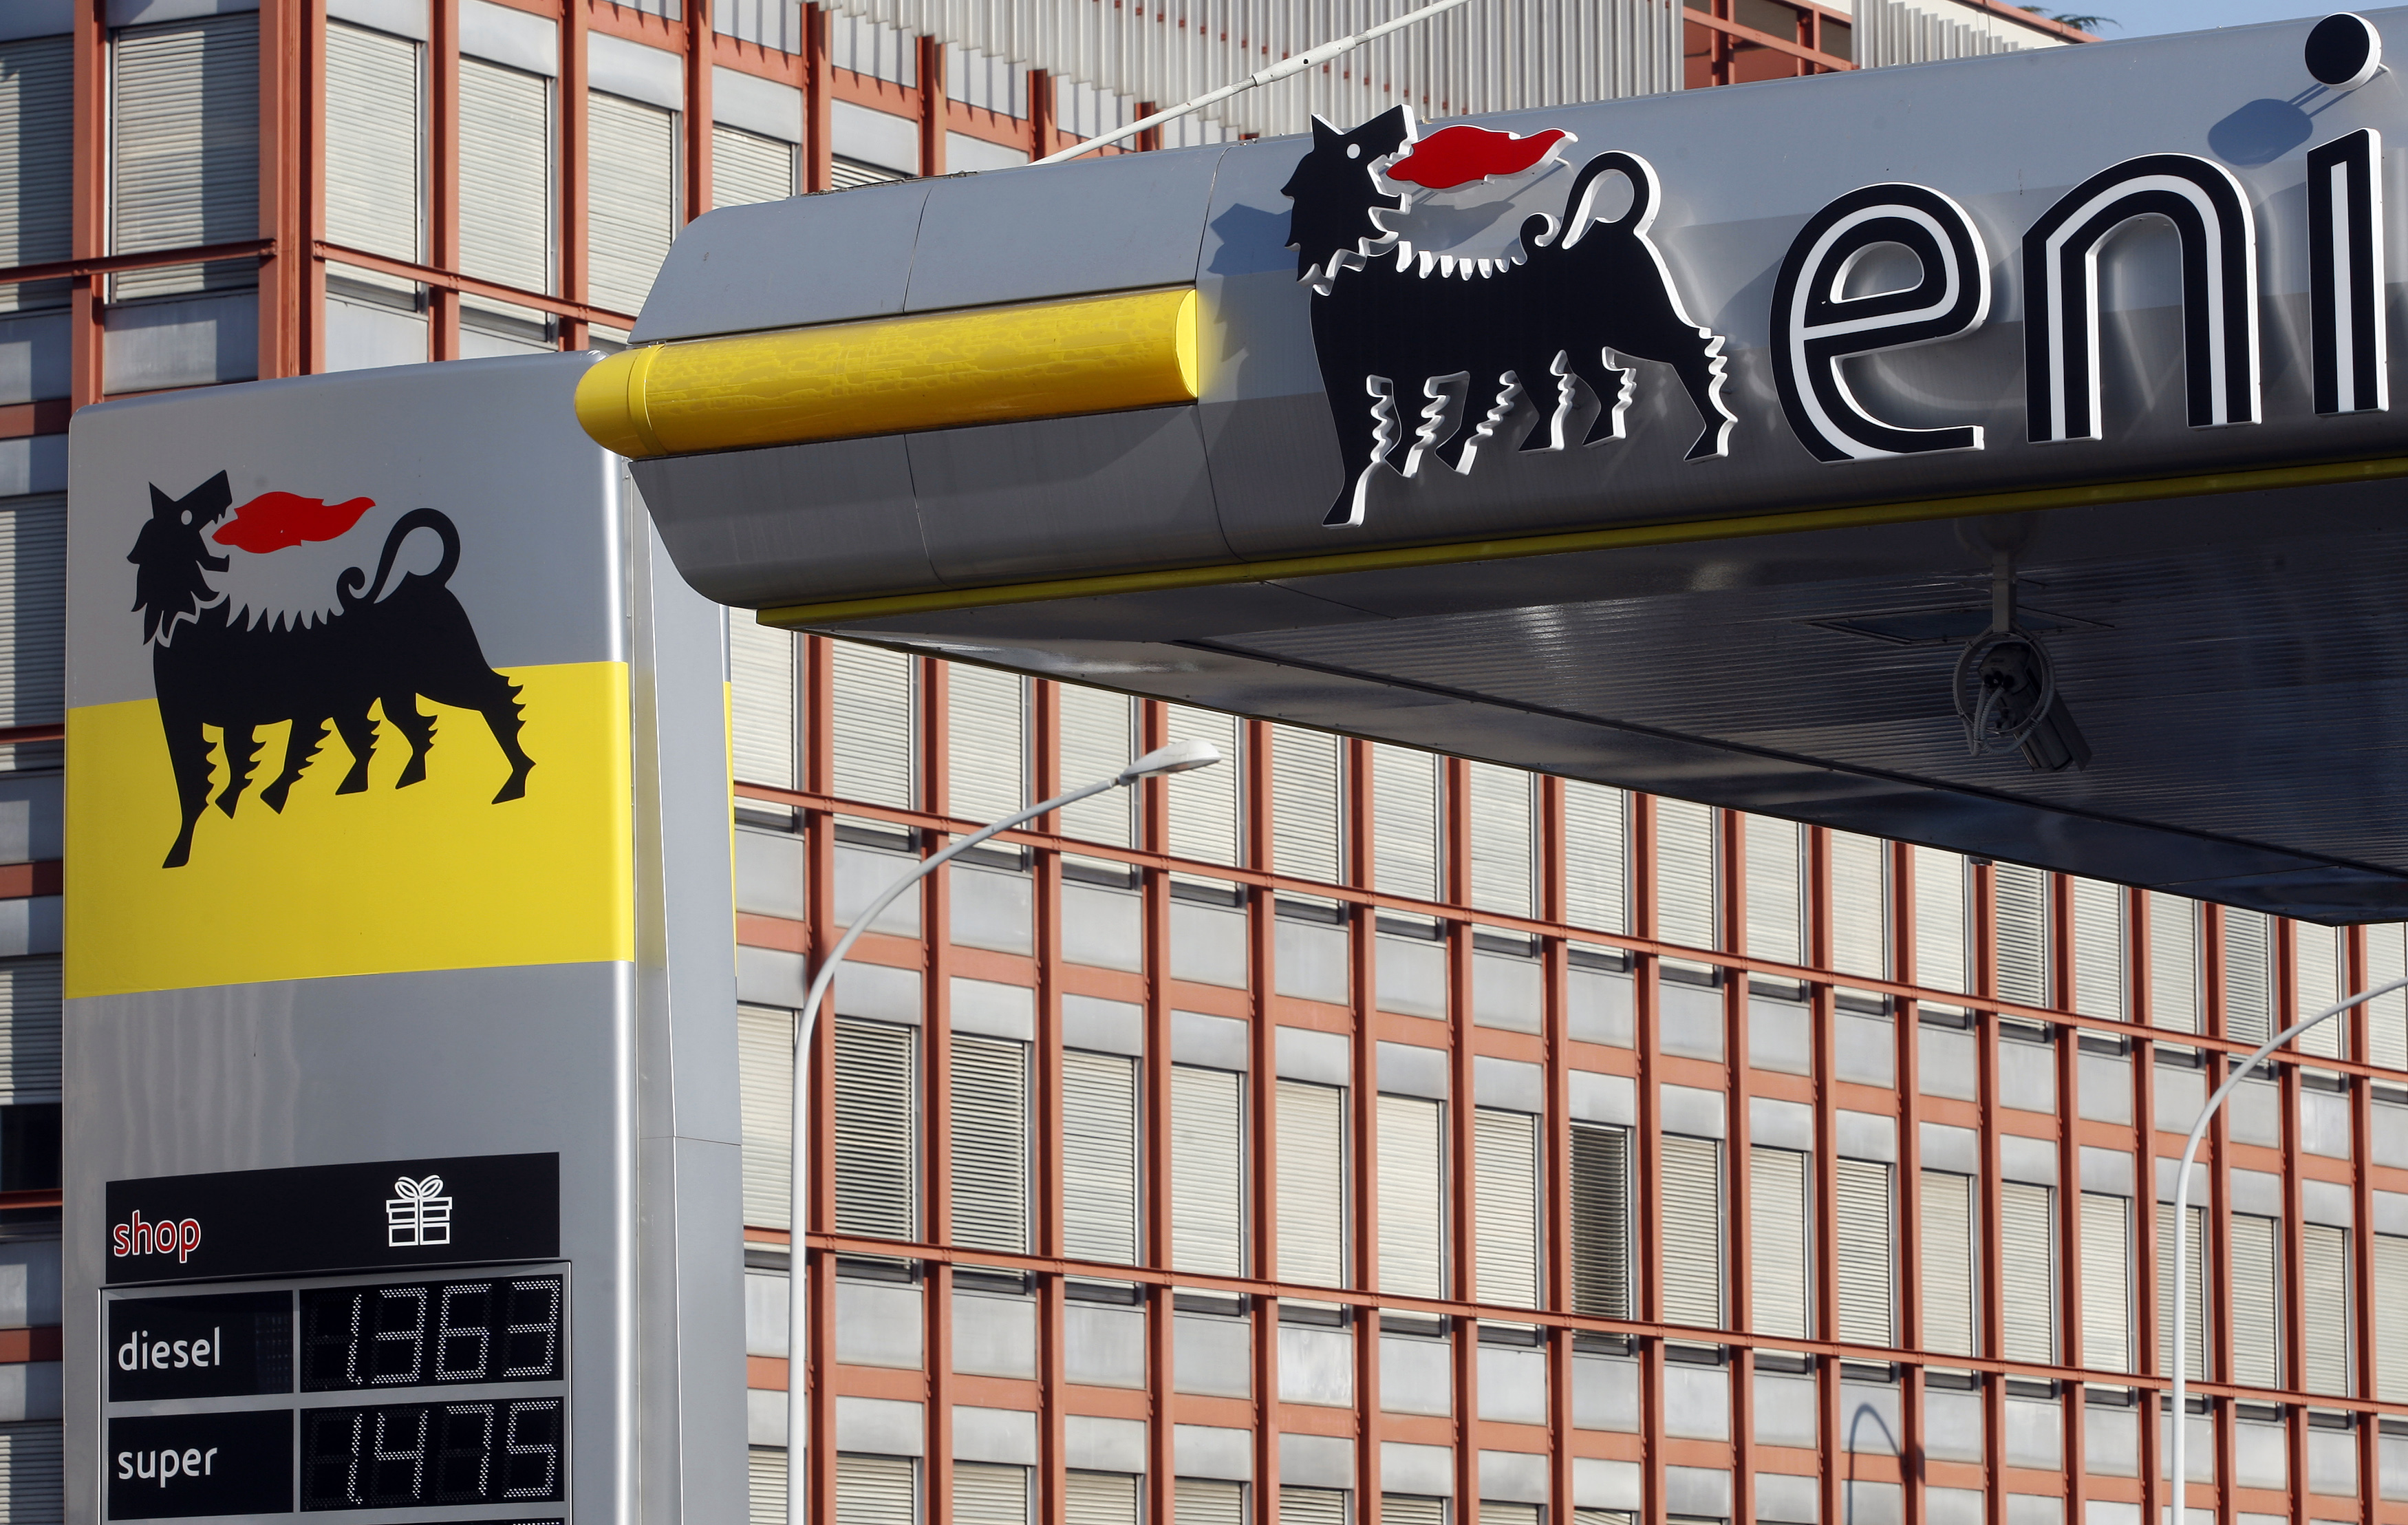 A petrol station of Italy's energy group ENI is seen in downtown Rome